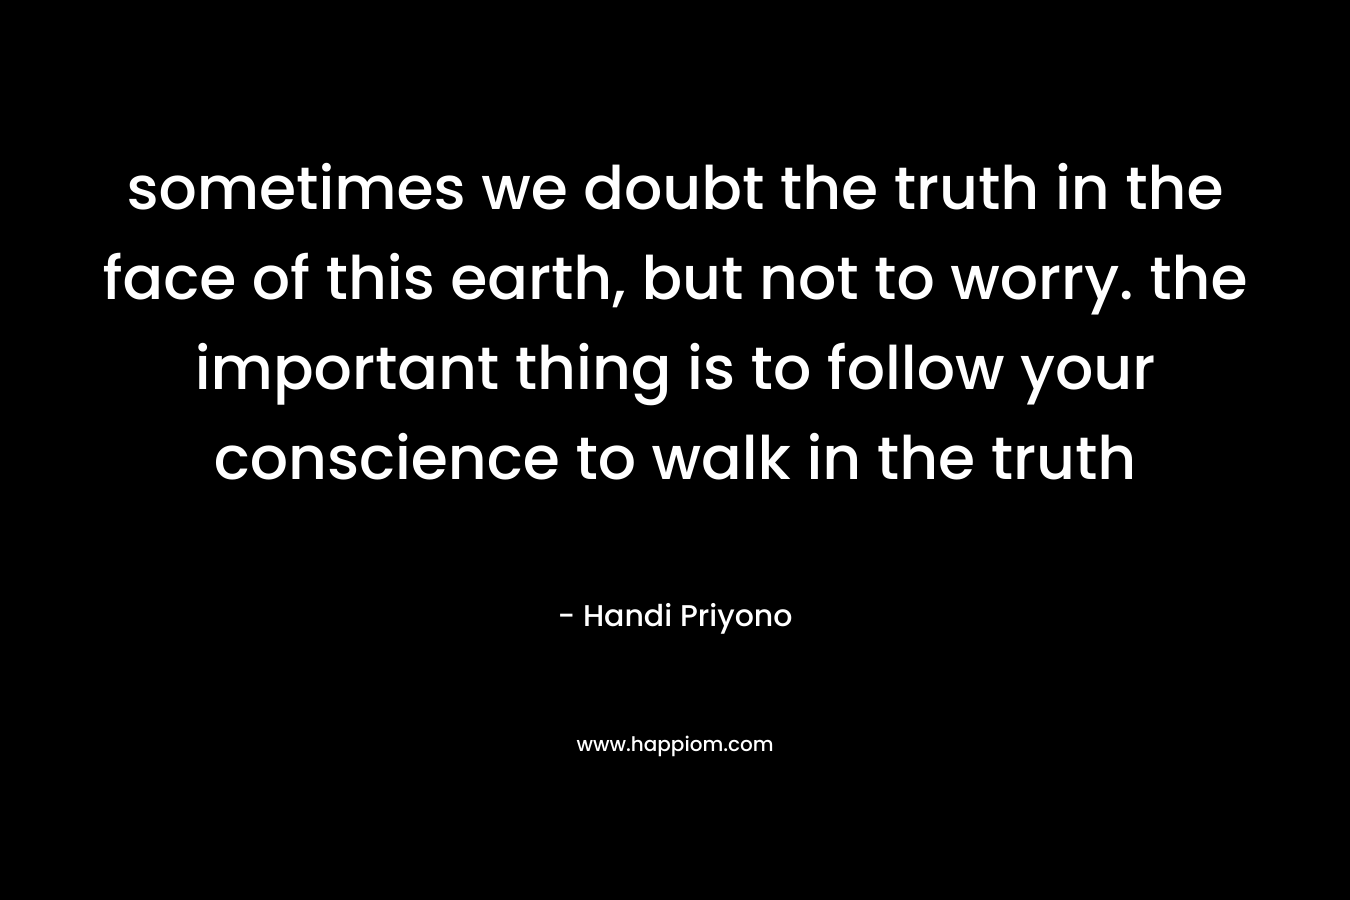 sometimes we doubt the truth in the face of this earth, but not to worry. the important thing is to follow your conscience to walk in the truth – Handi Priyono